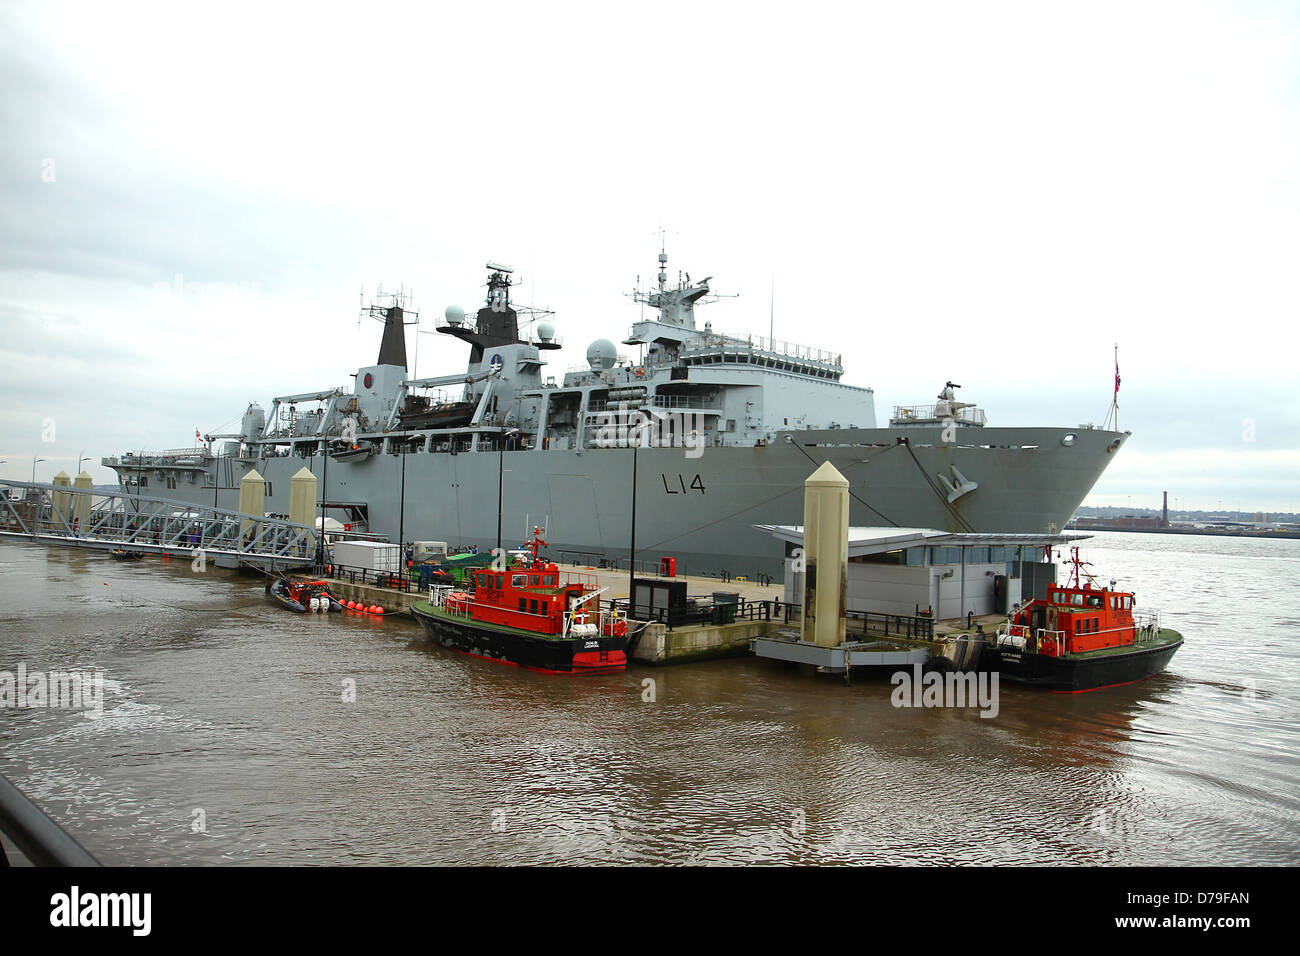 One of the Royal Navy's largest warships is in Liverpool for a six-day visit to the city. HMS Albion, an 18,000 tonne Stock Photo